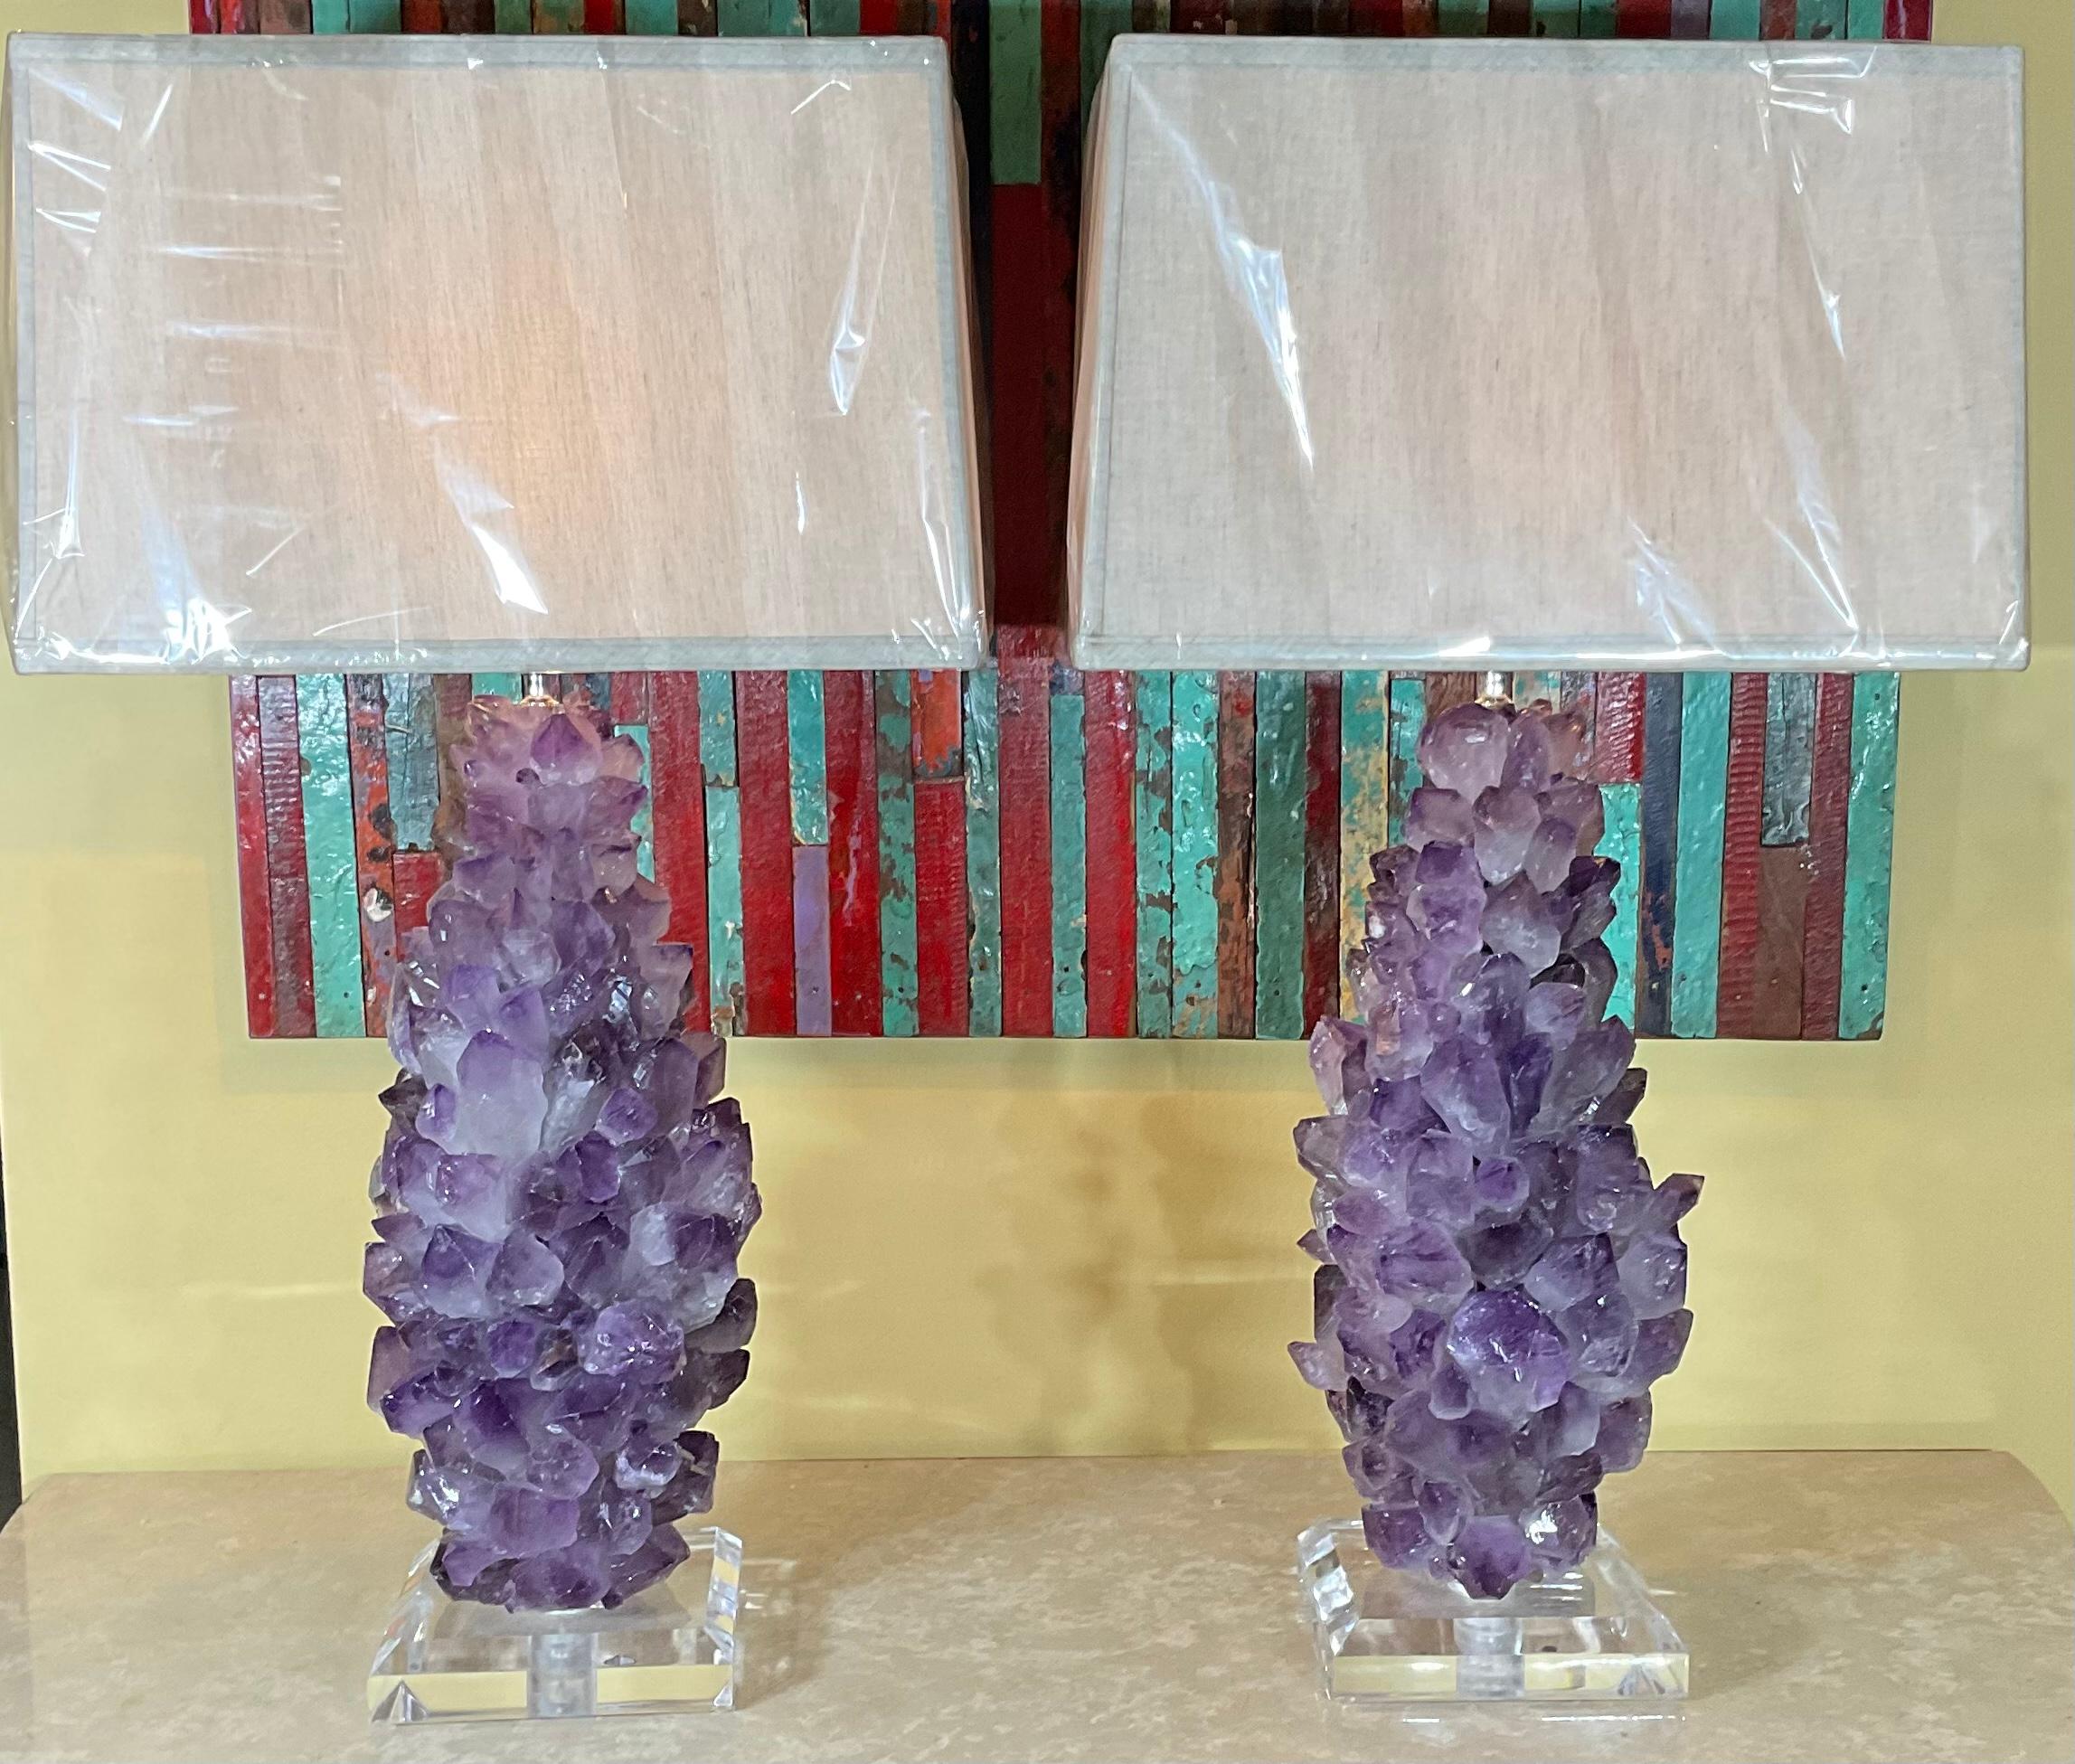 Fantastic one of a kind pair of lamps made of amethyst crystal quartz, mounted on a beveled lucite base 
Wired and ready to light.
Lucite base size: 7” x 7” x 1.5
Lamp shades are not included.